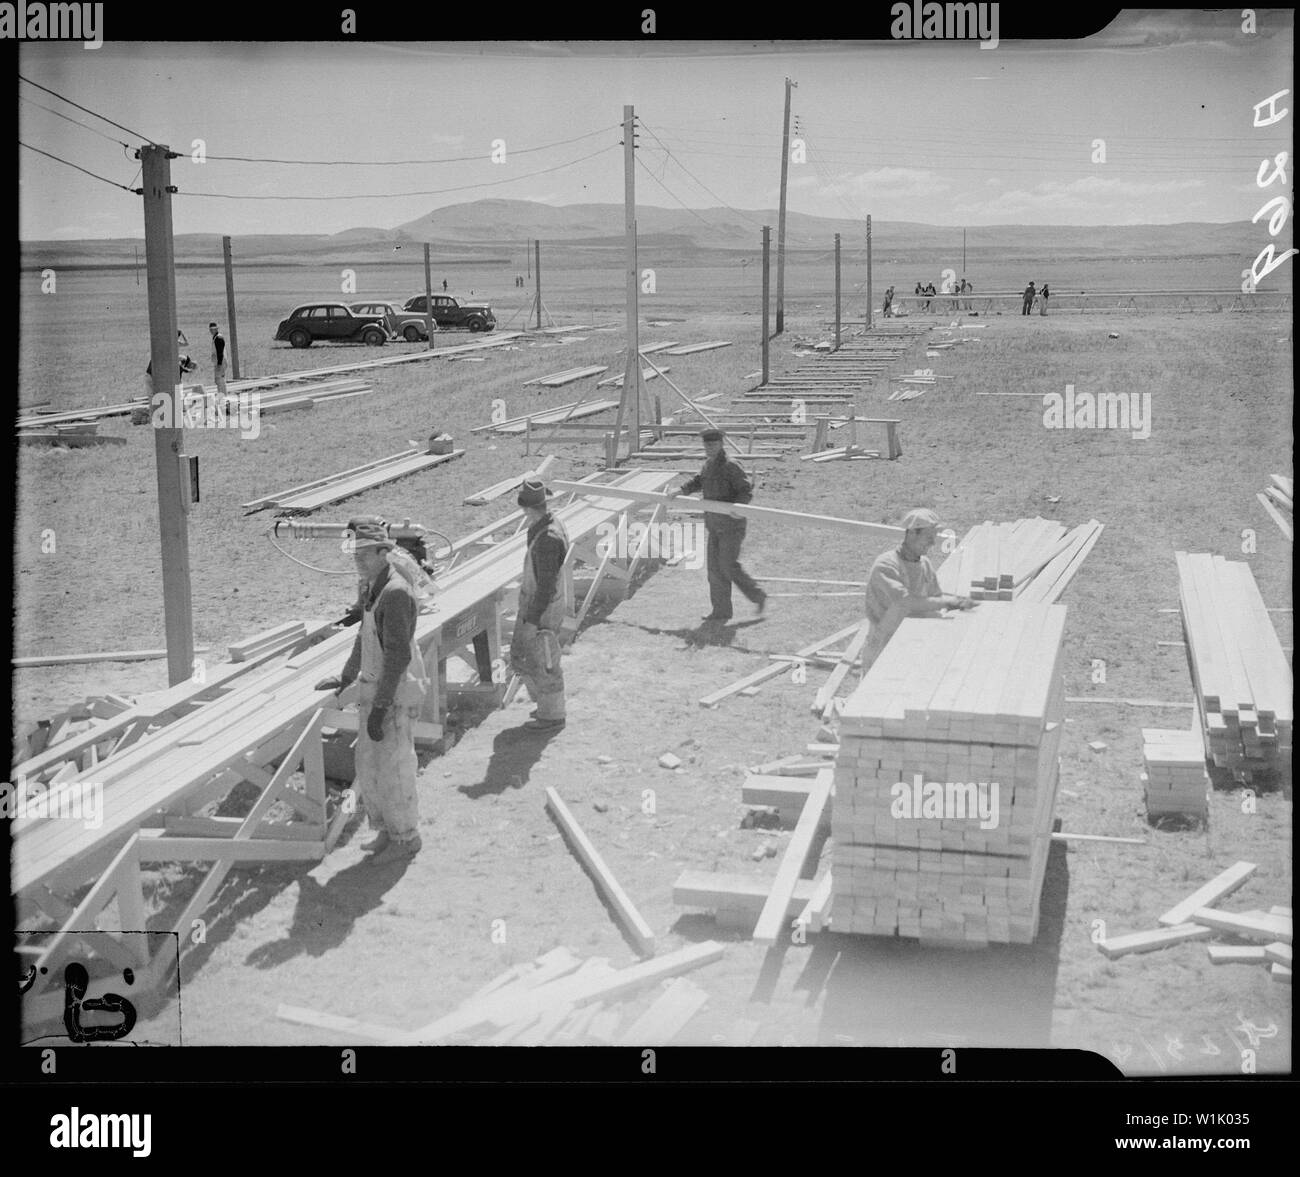 Tule Lake Relocation Center, Newell, California. Construction begins on this War Relocation Authori . . .; Scope and content:  The full caption for this photograph reads: Tule Lake Relocation Center, Newell, California. Construction begins on this War Relocation Authority center for evacuees of Japanese ancestry near Tule Lake in Modoc County, California, south of the Oregon border. Stock Photo